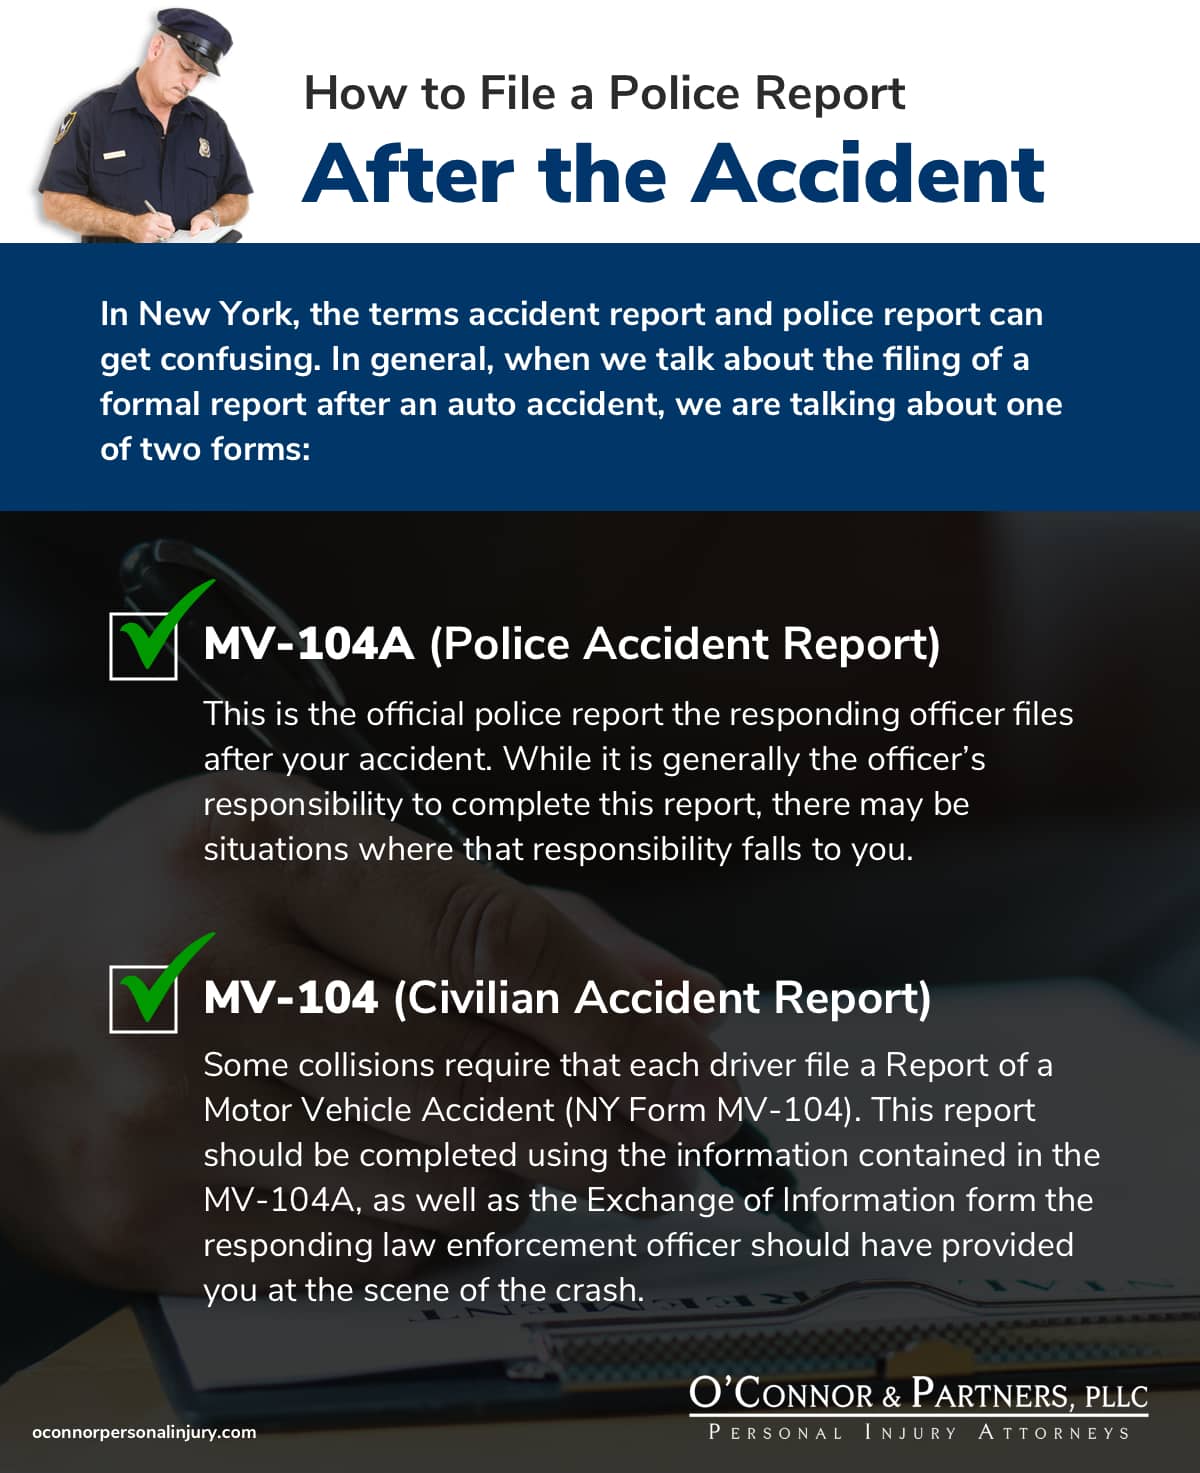 Can I Still File a Police Report After an Accident?